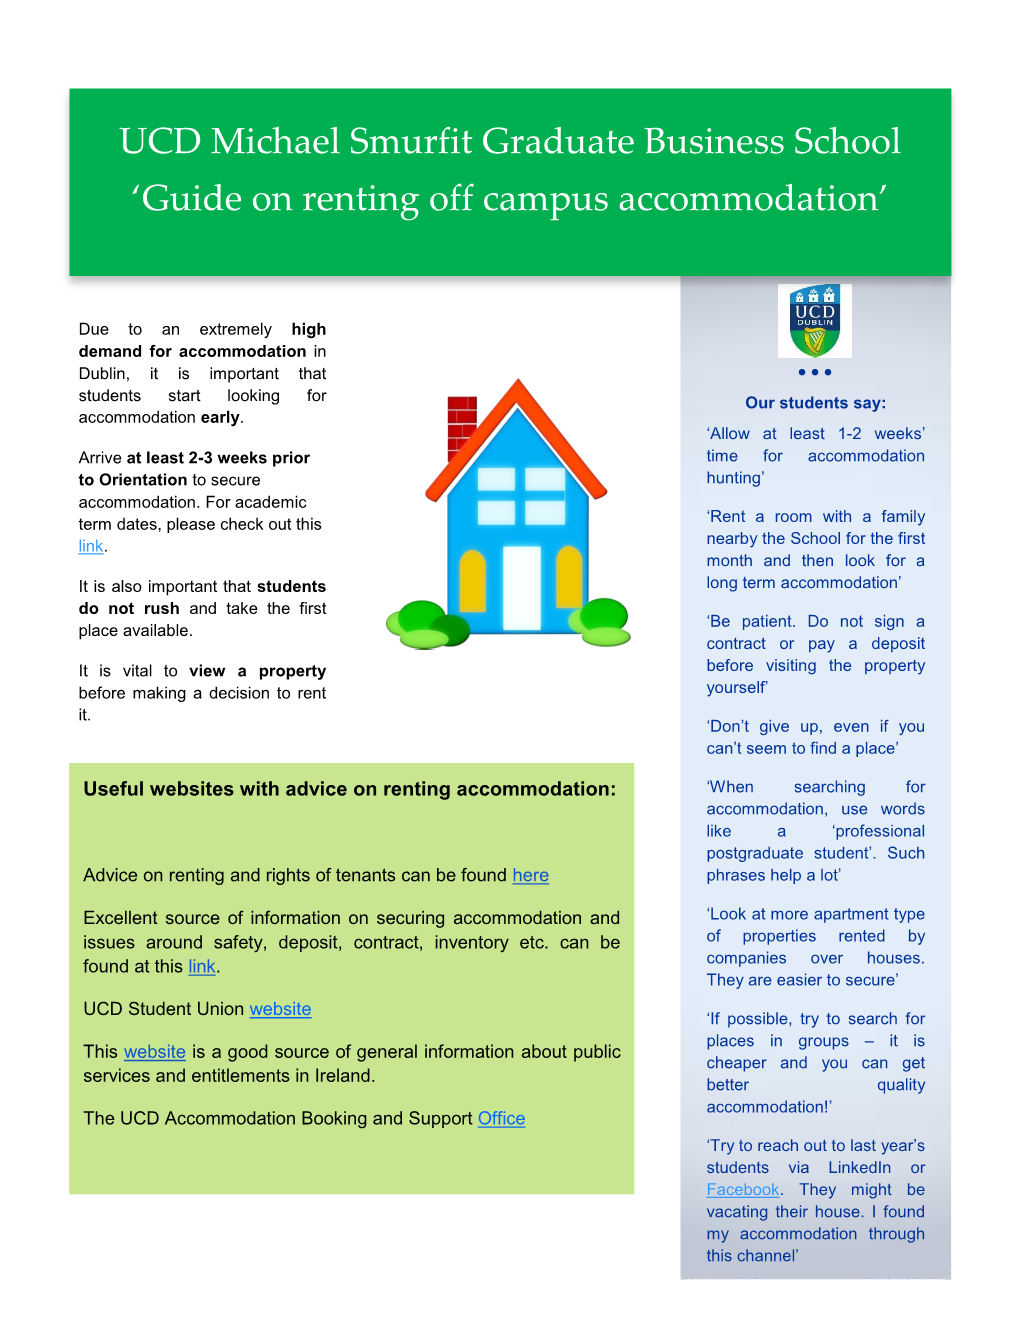 Guide on Renting Off Campus Accommodation’